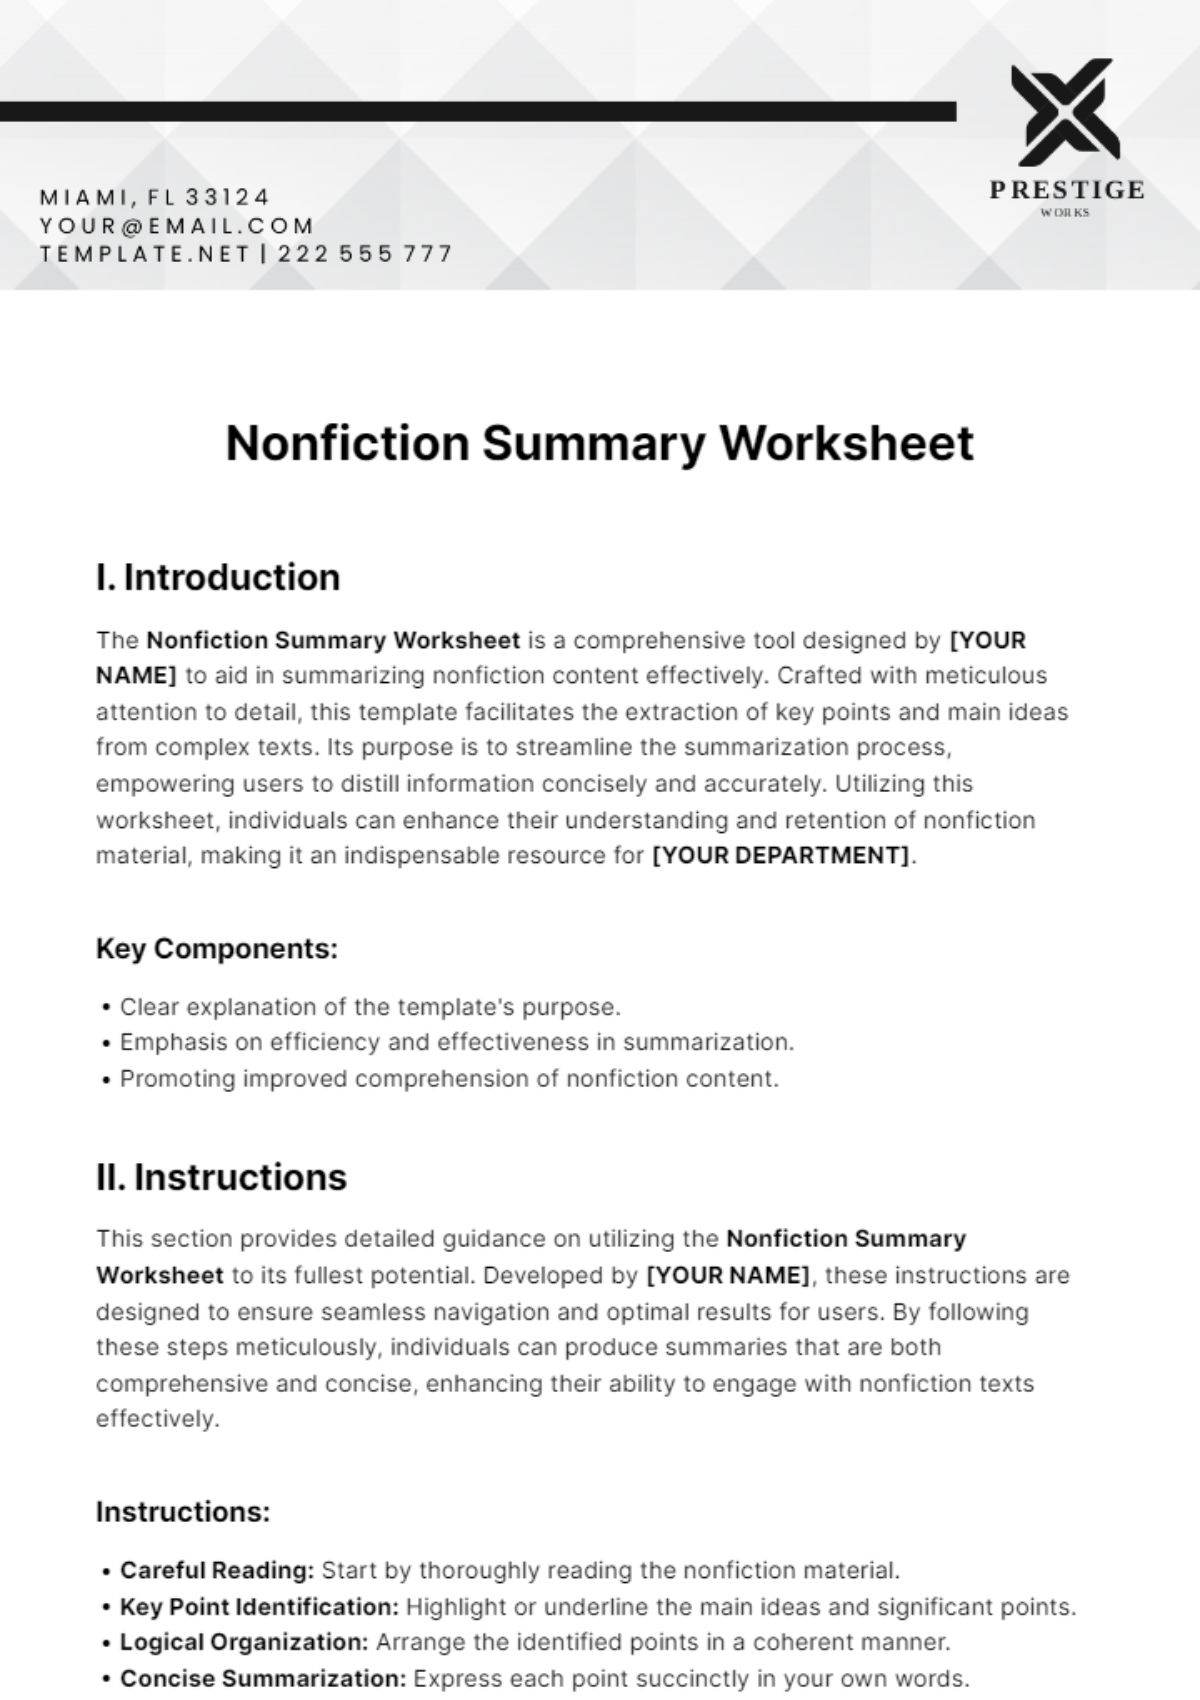 Free Nonfiction Summary Worksheet Template